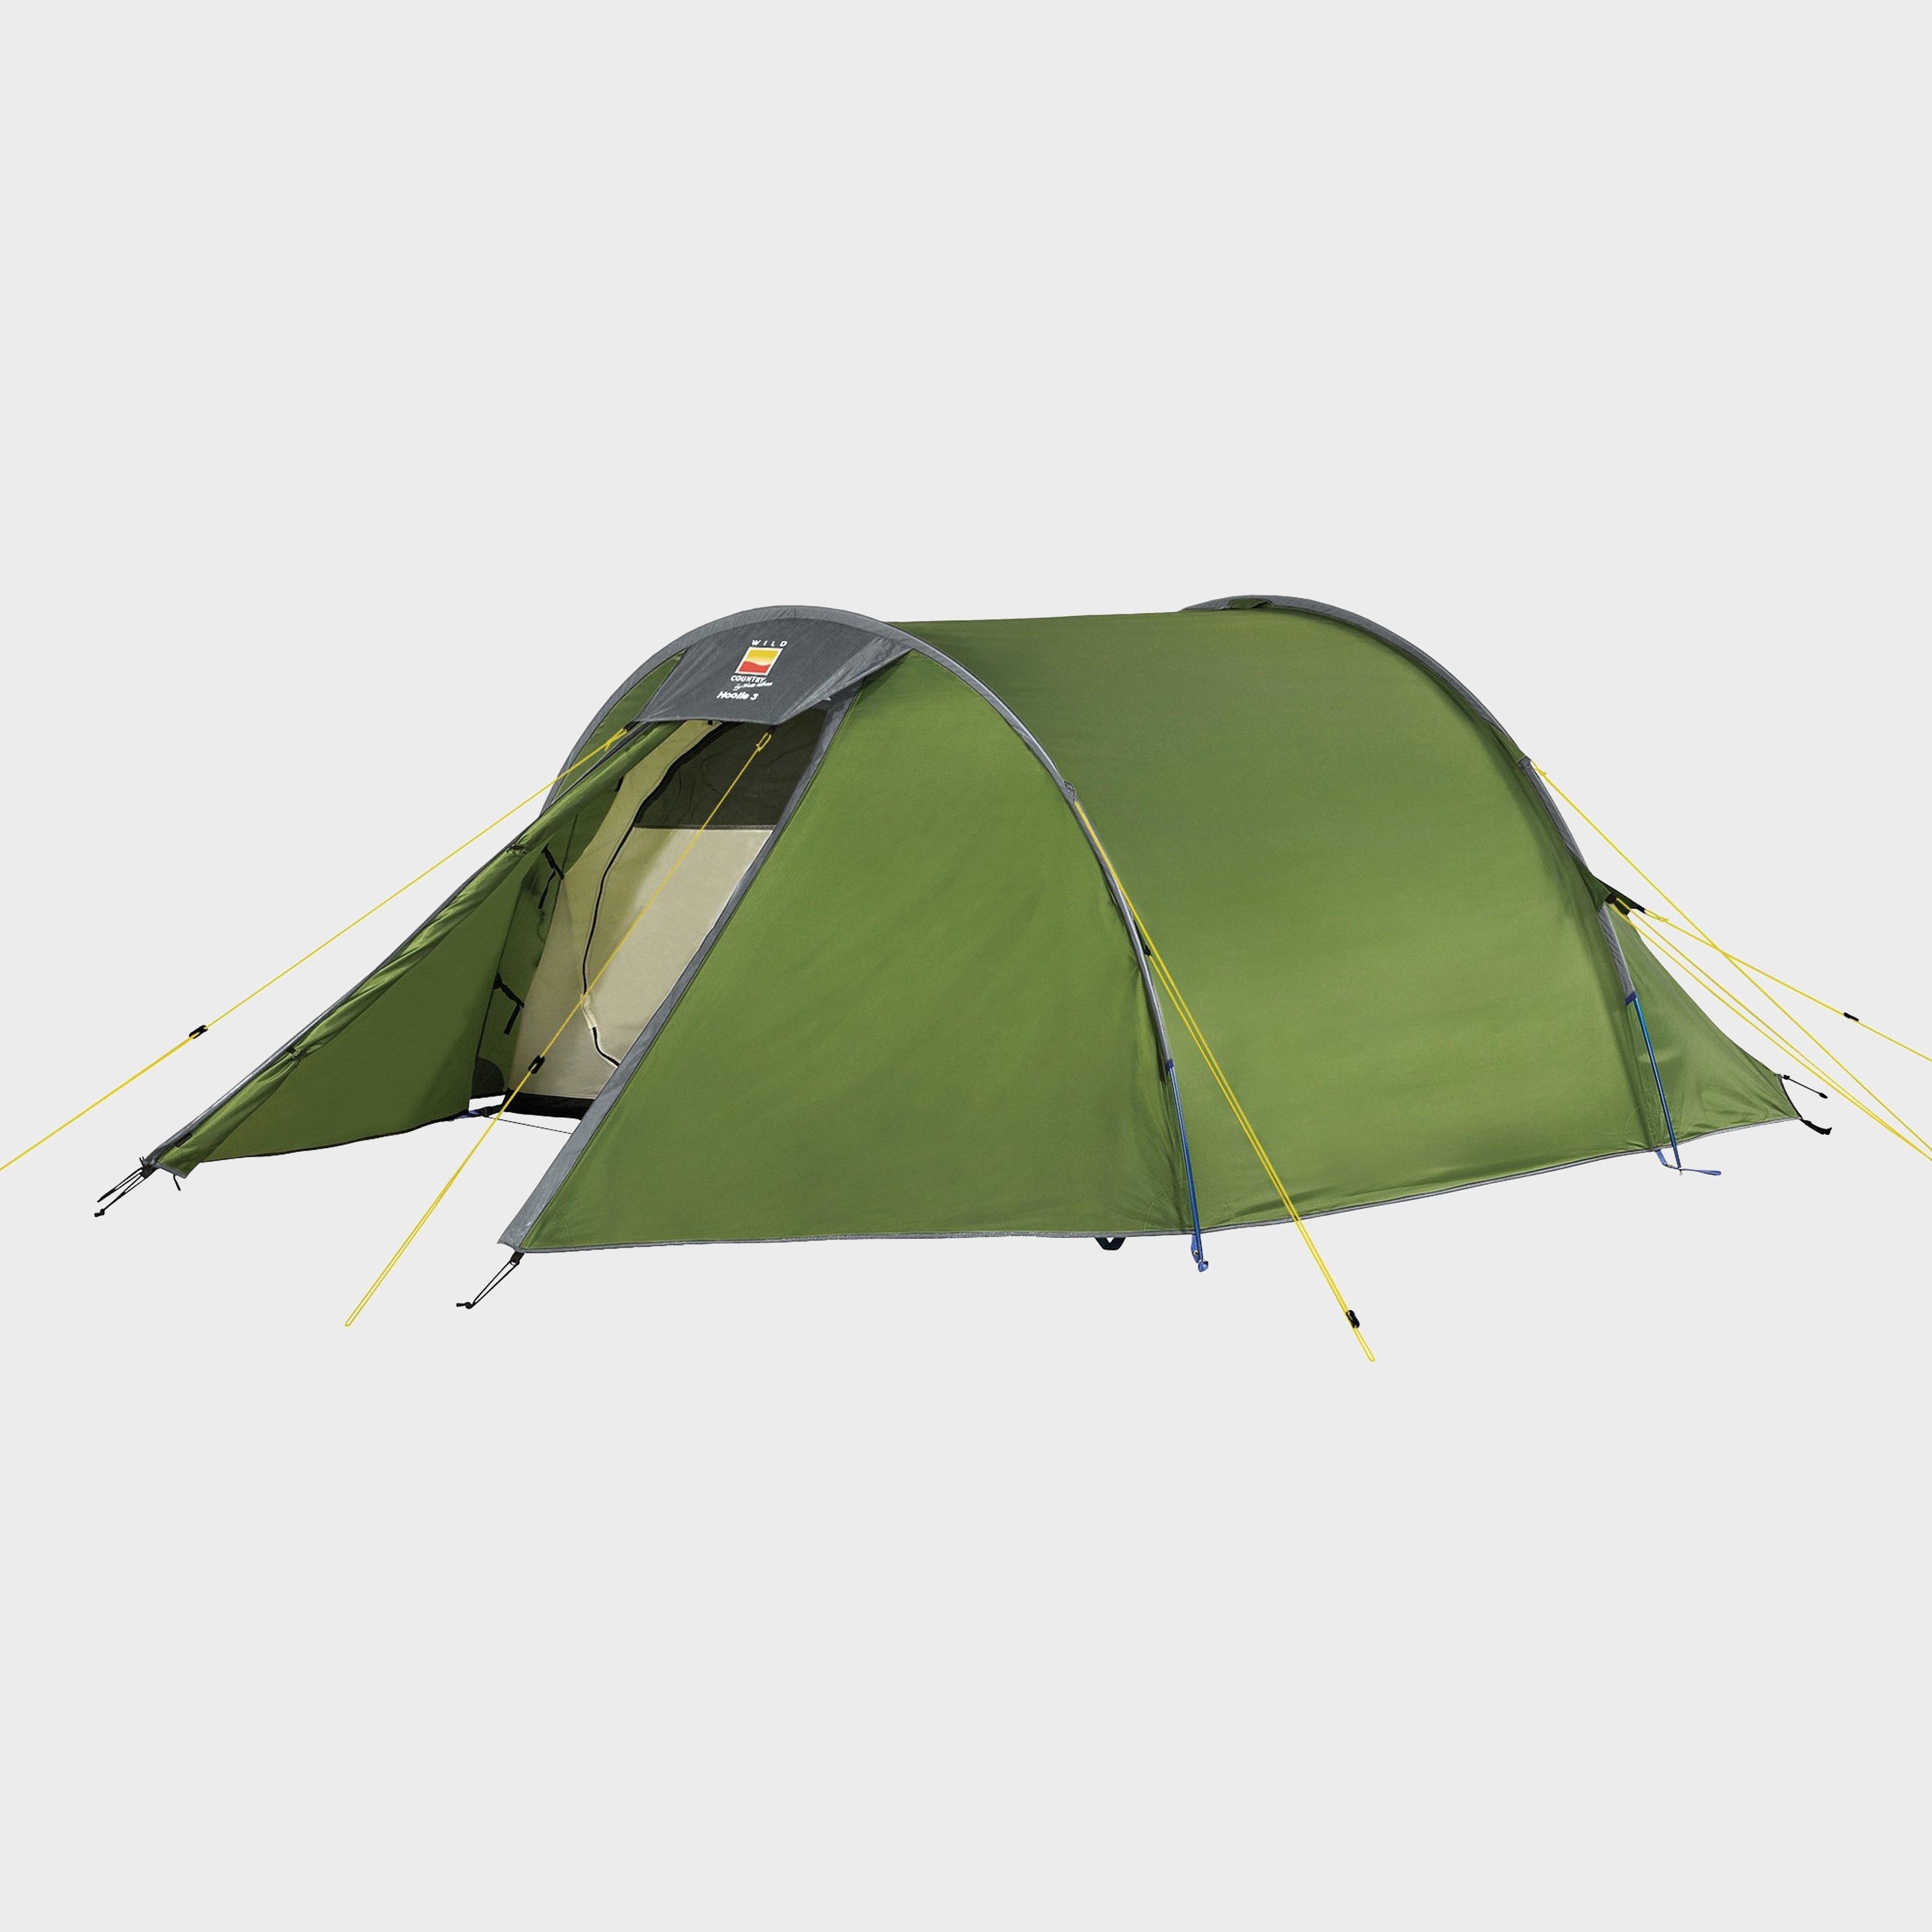  Wild Country Hoolie Compact 3 Tent, Green